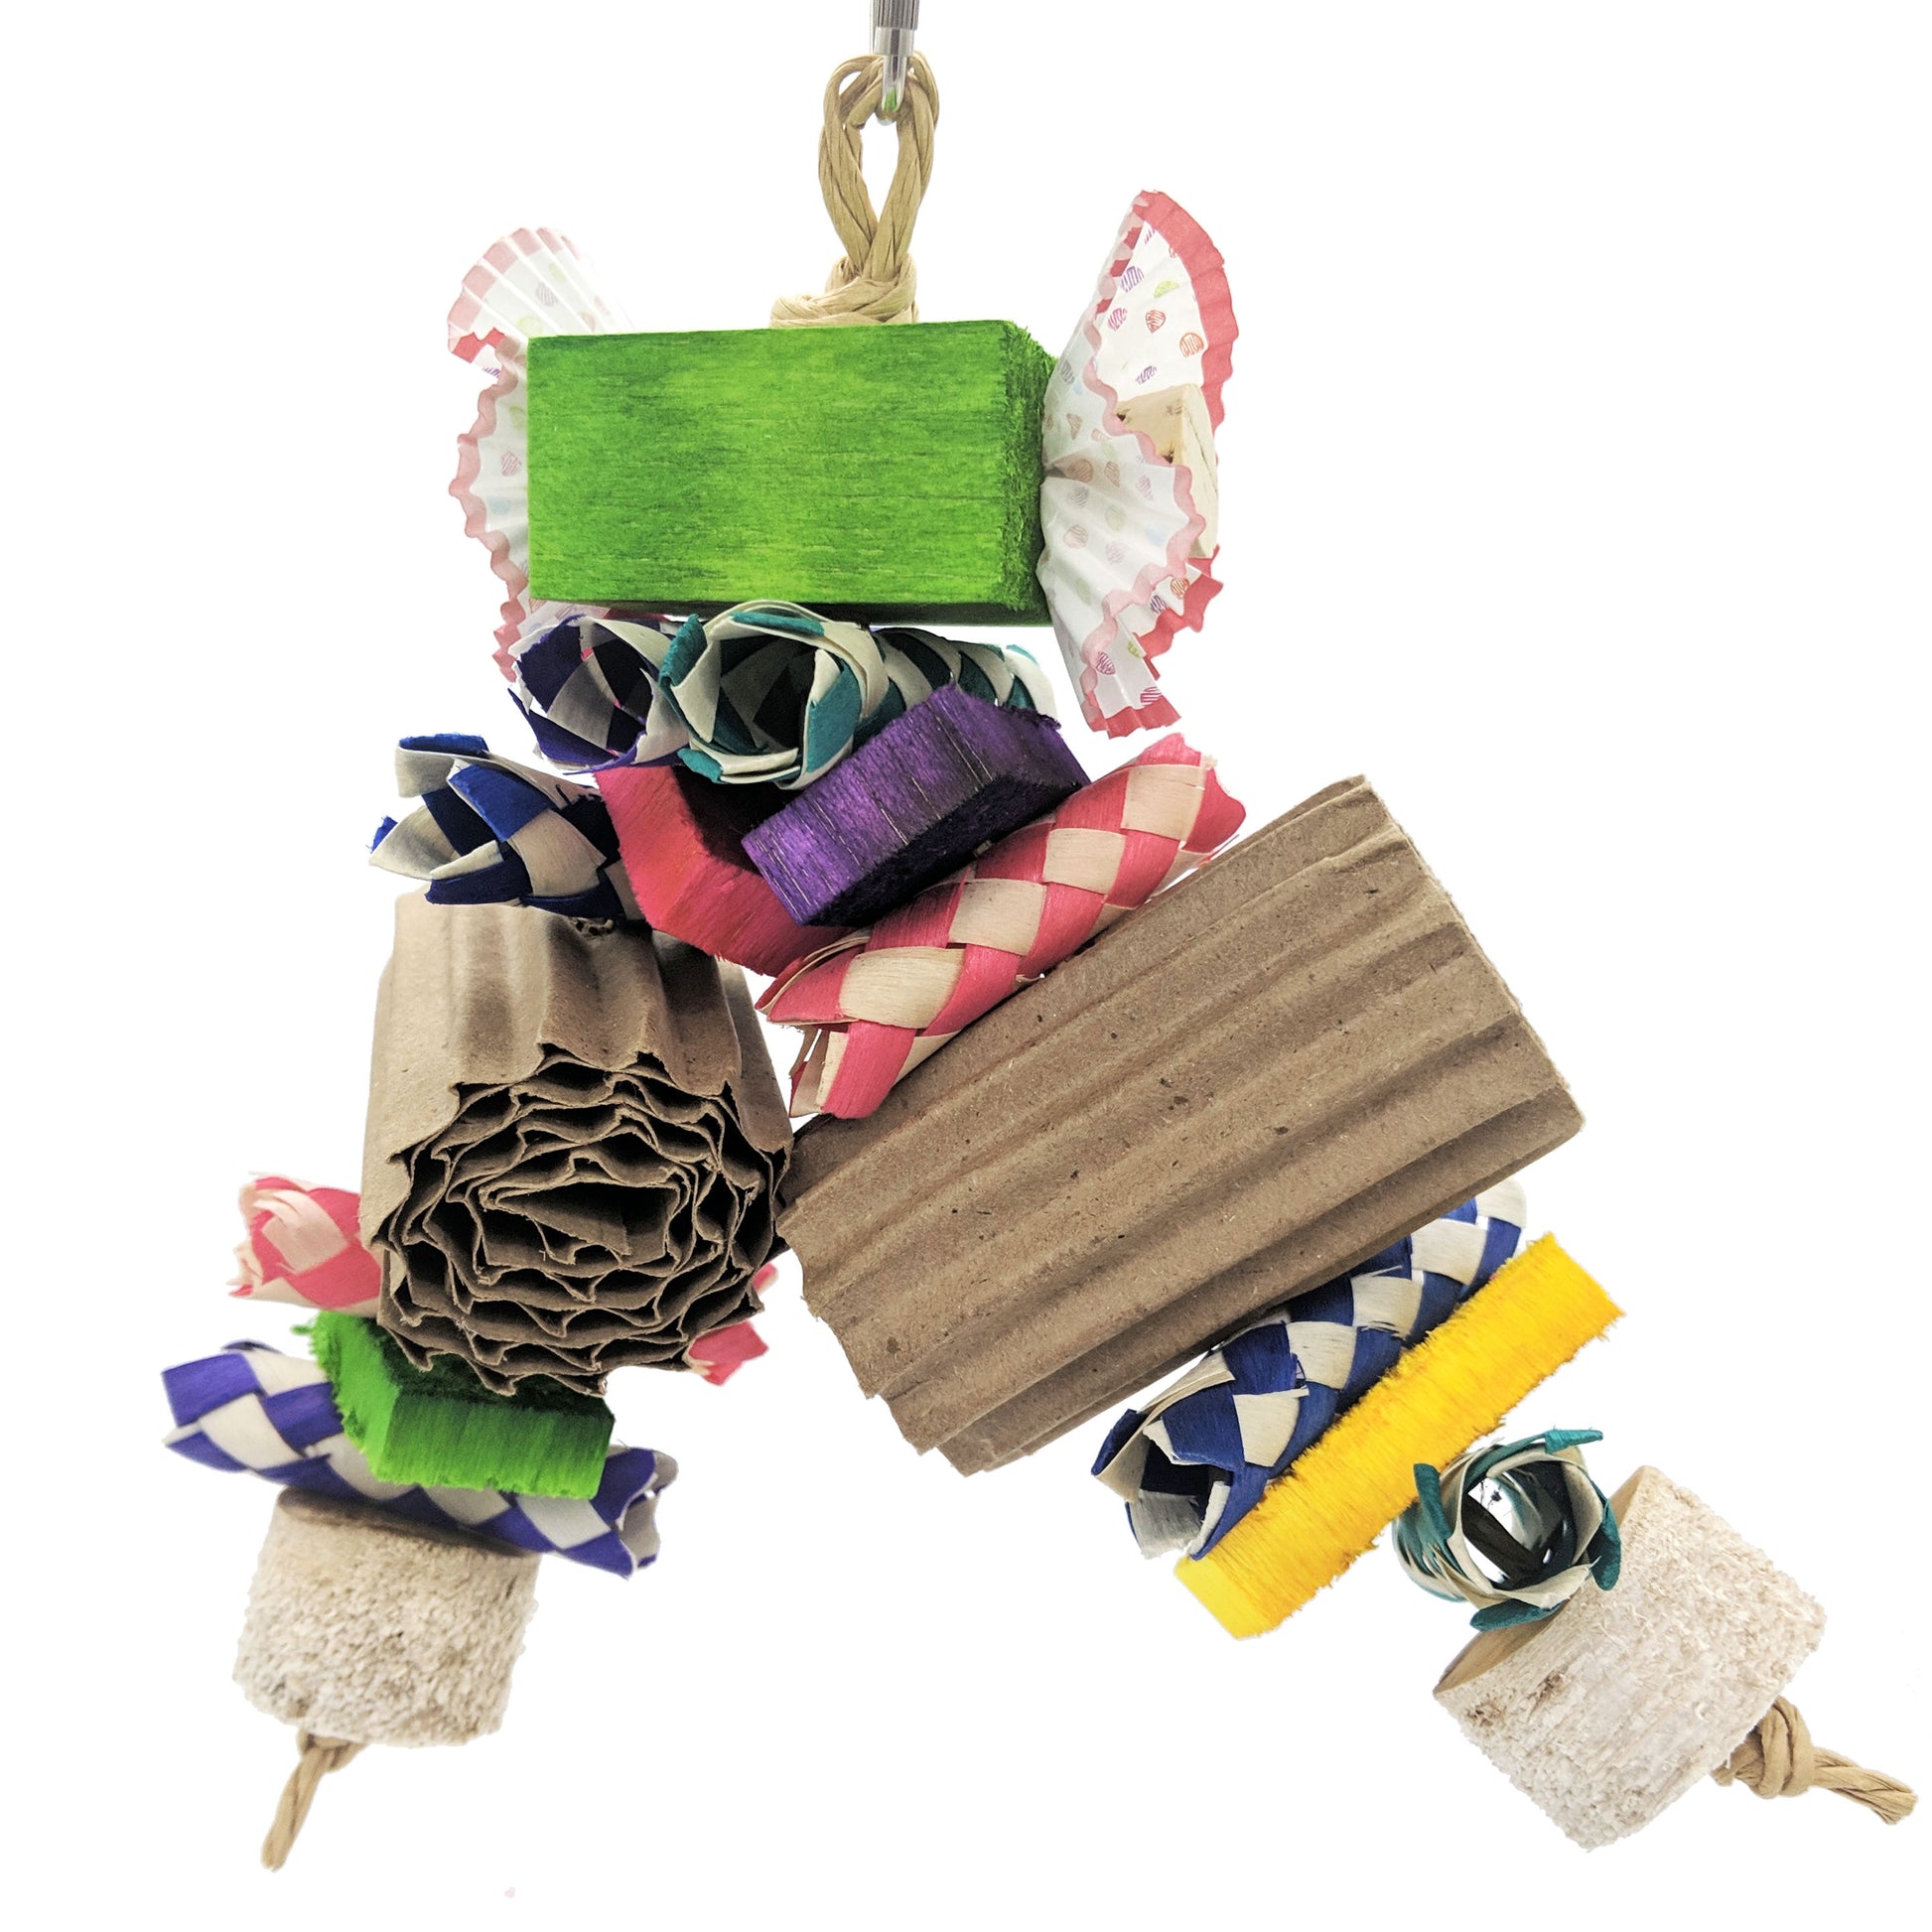 A parrot toy, with a 2 x 2 x 1 inch balsa block at the top. embedded with 2 cork stoppers and cupcake liners. From there on two strands, palm finger traps, half inch balsa slats, rolled corrugated cardboard, and finished with yucca chunks. 